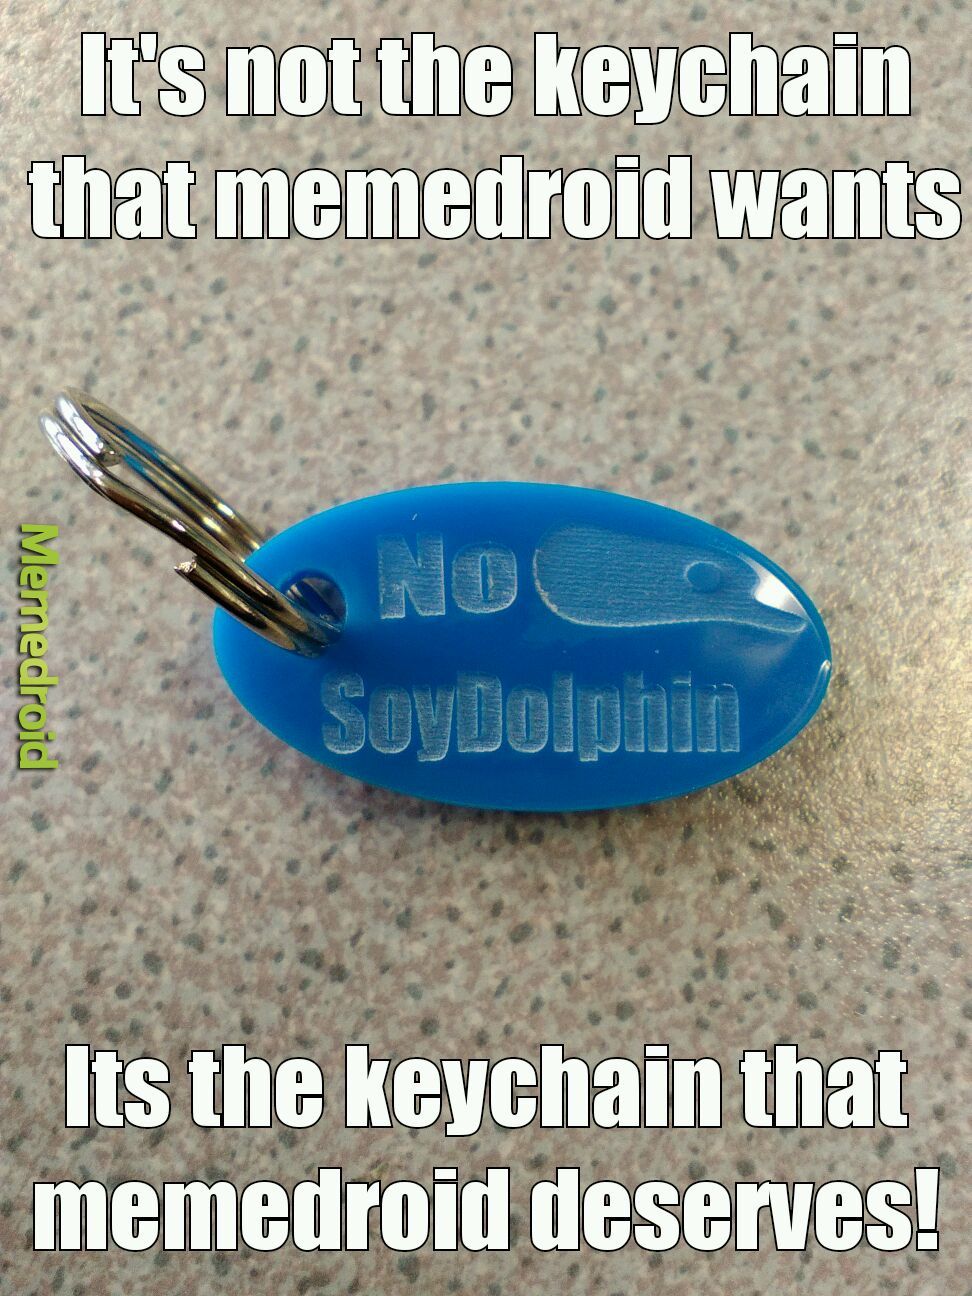 This keychain was made - meme